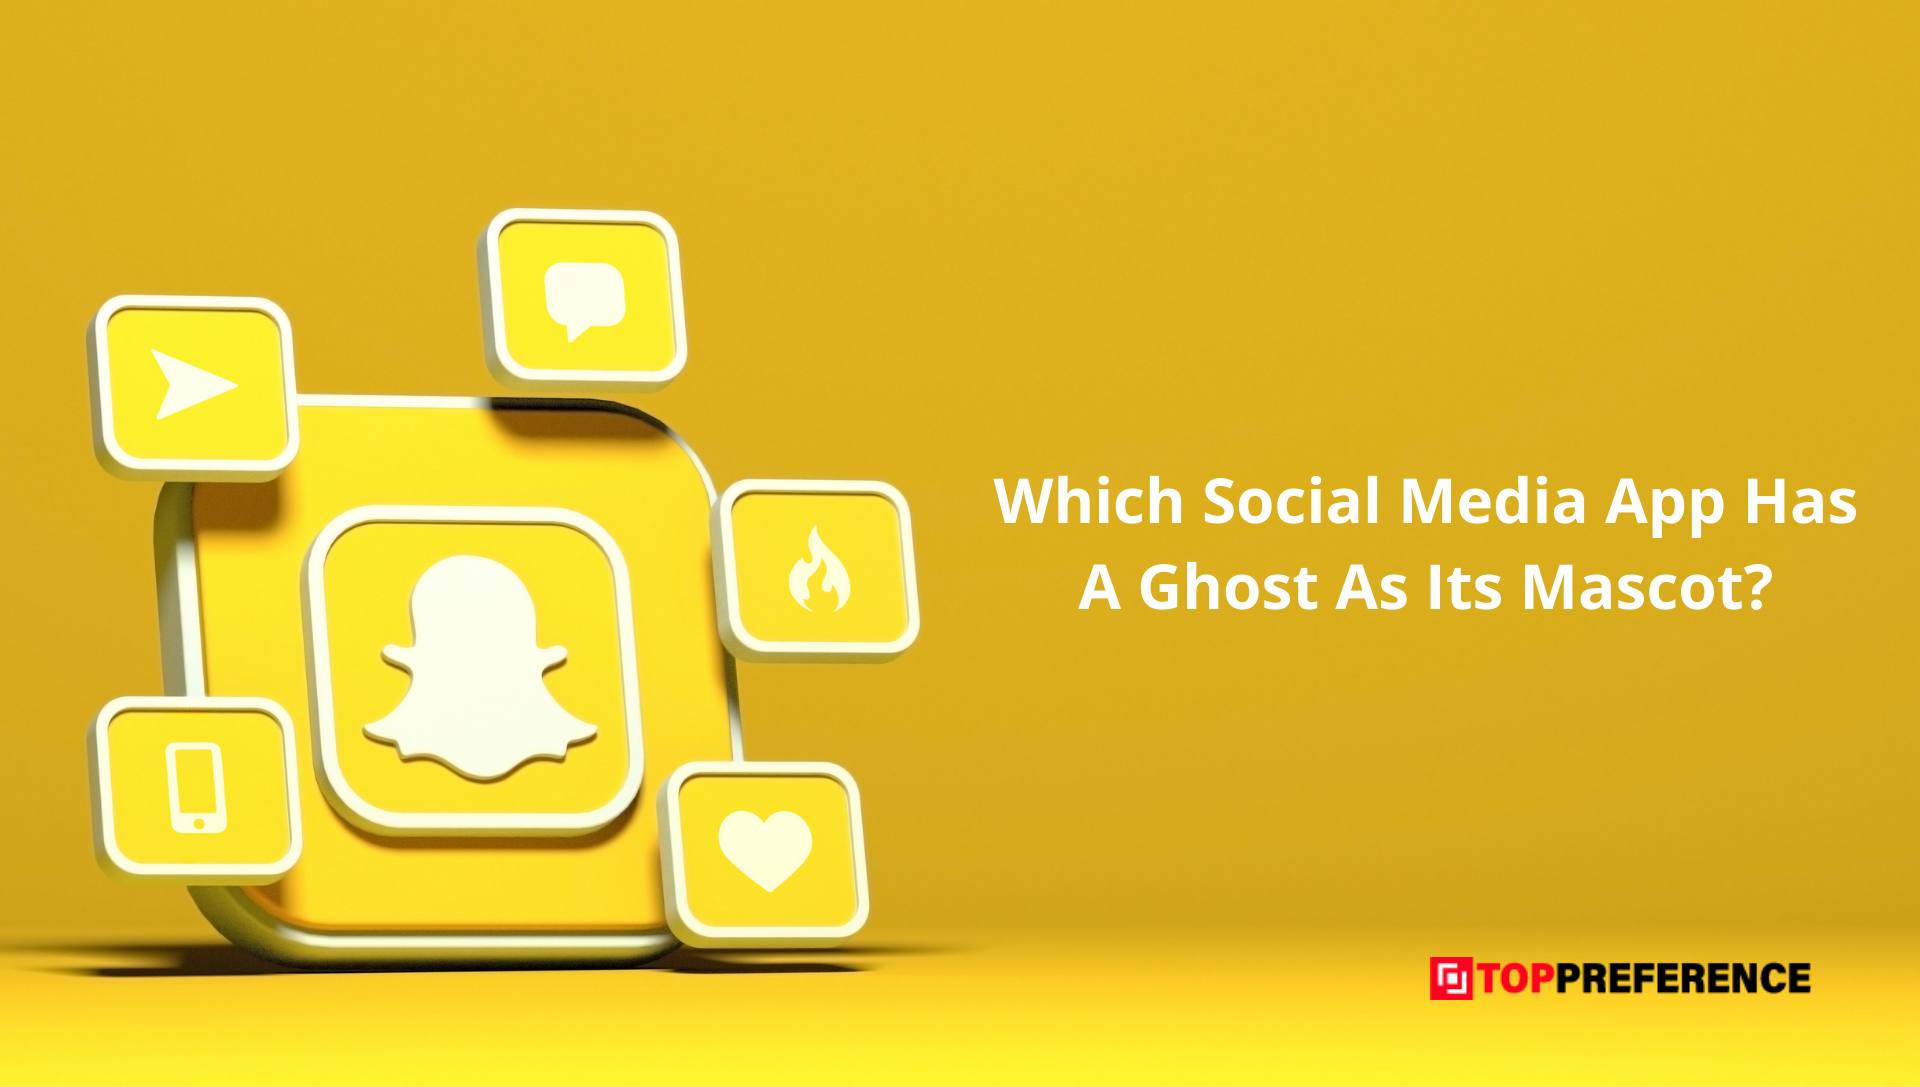 Which Social Media App Has A Ghost As Its Mascot?